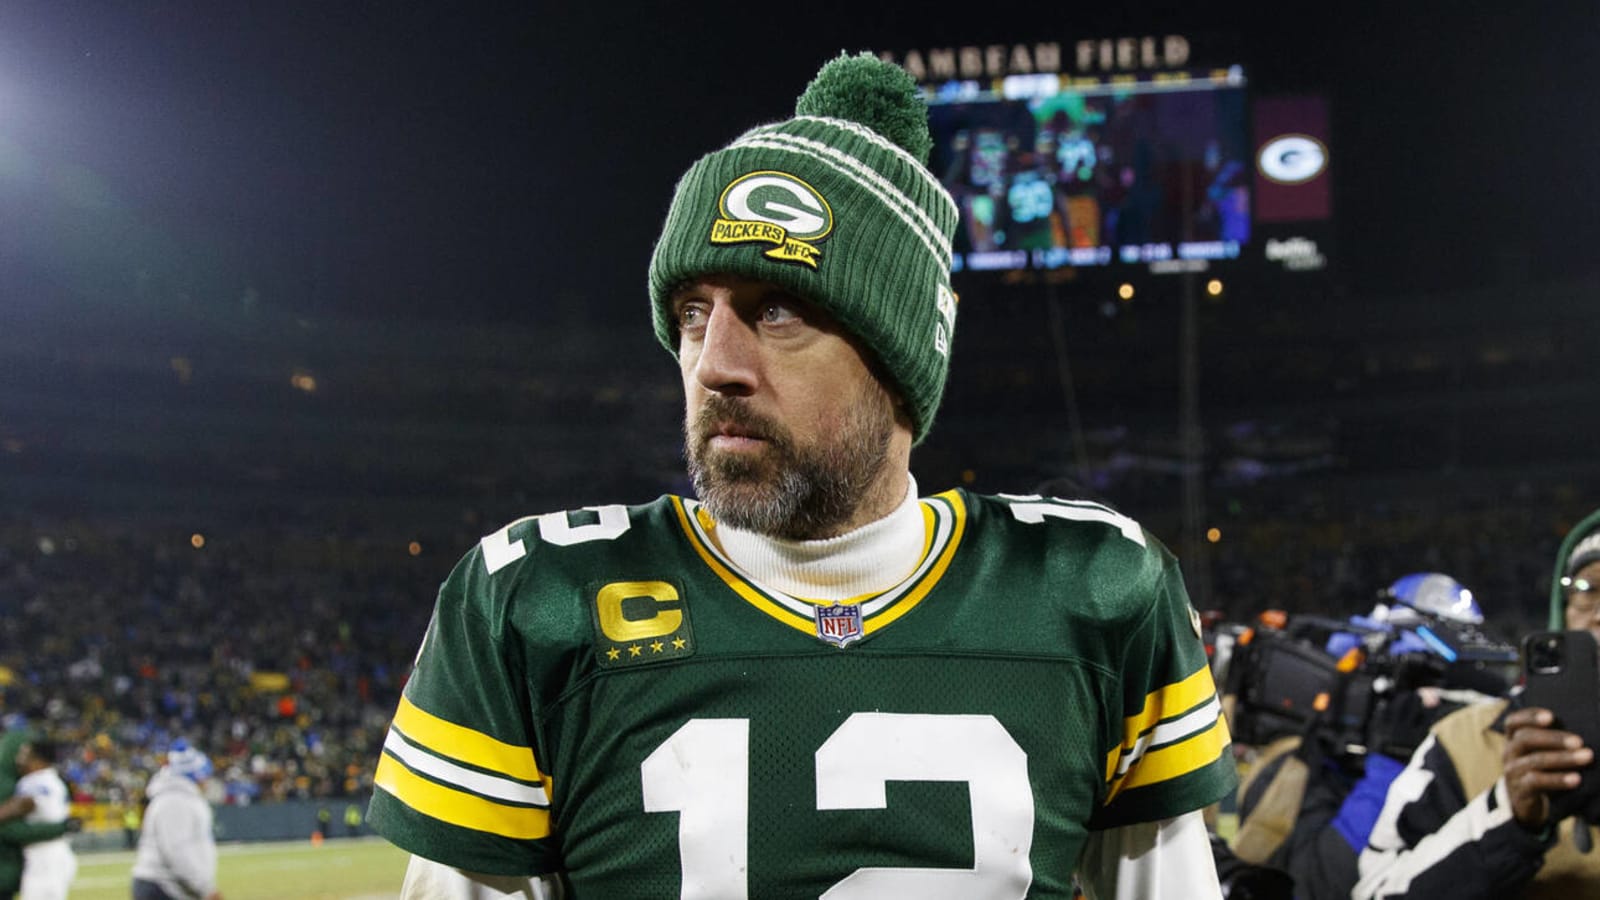 NFL fans destined for offseason of Aaron Rodgers rumors